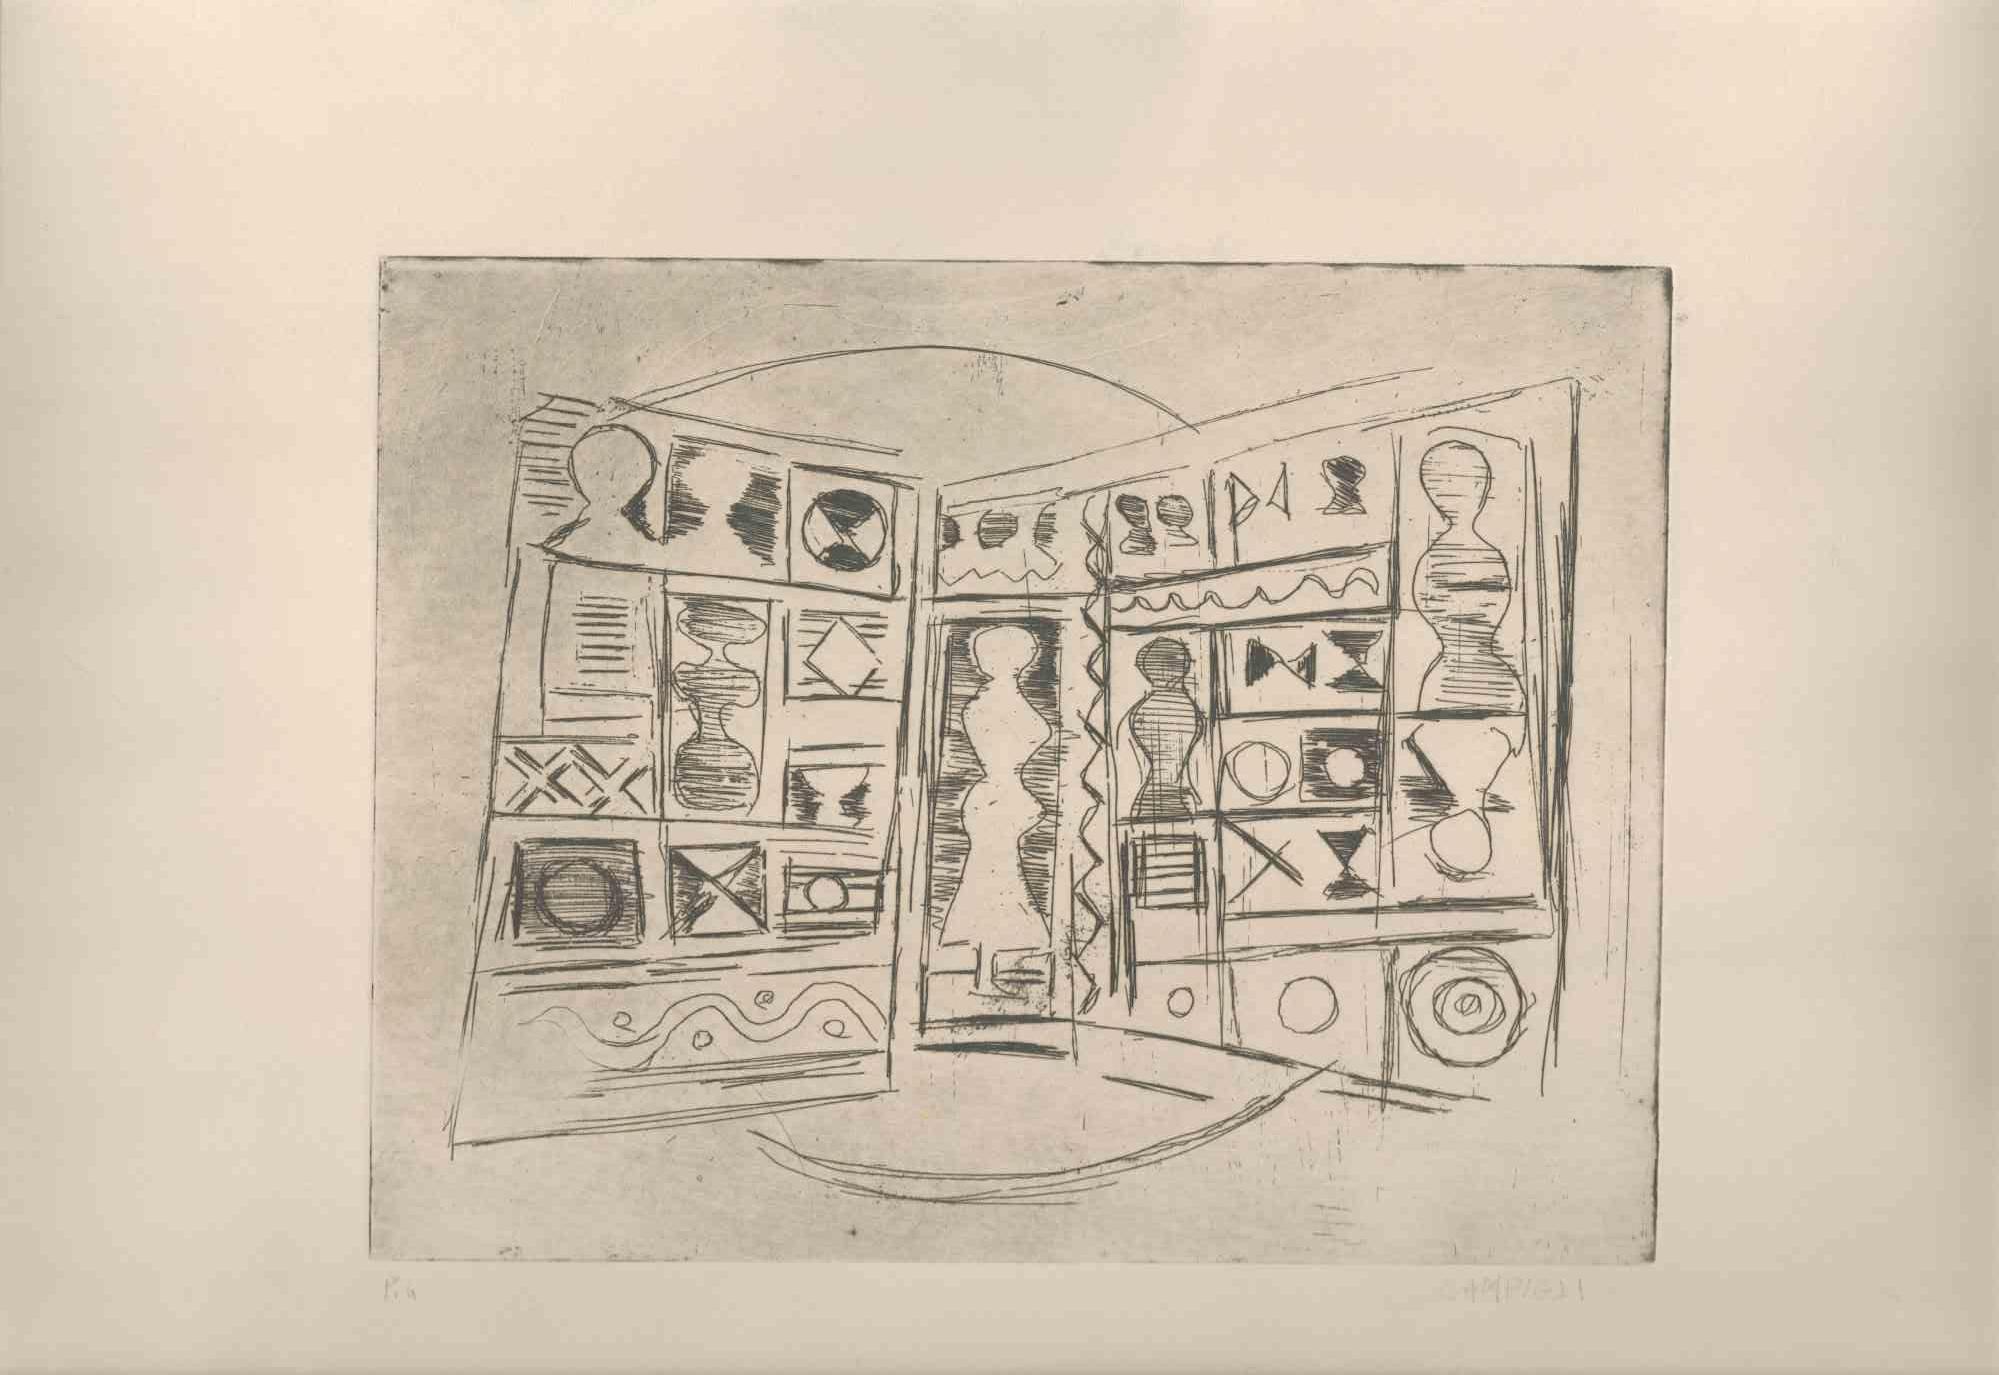 Massimo Campigli (1895-1971)

Windows
Etching and aquatint, 49,5 x 35,5 cm 
Printed on Fabriano paper. Signed in pencil on the lower right, "P. A." on the lower left.
Fresh impression, very good condition. Without frame.